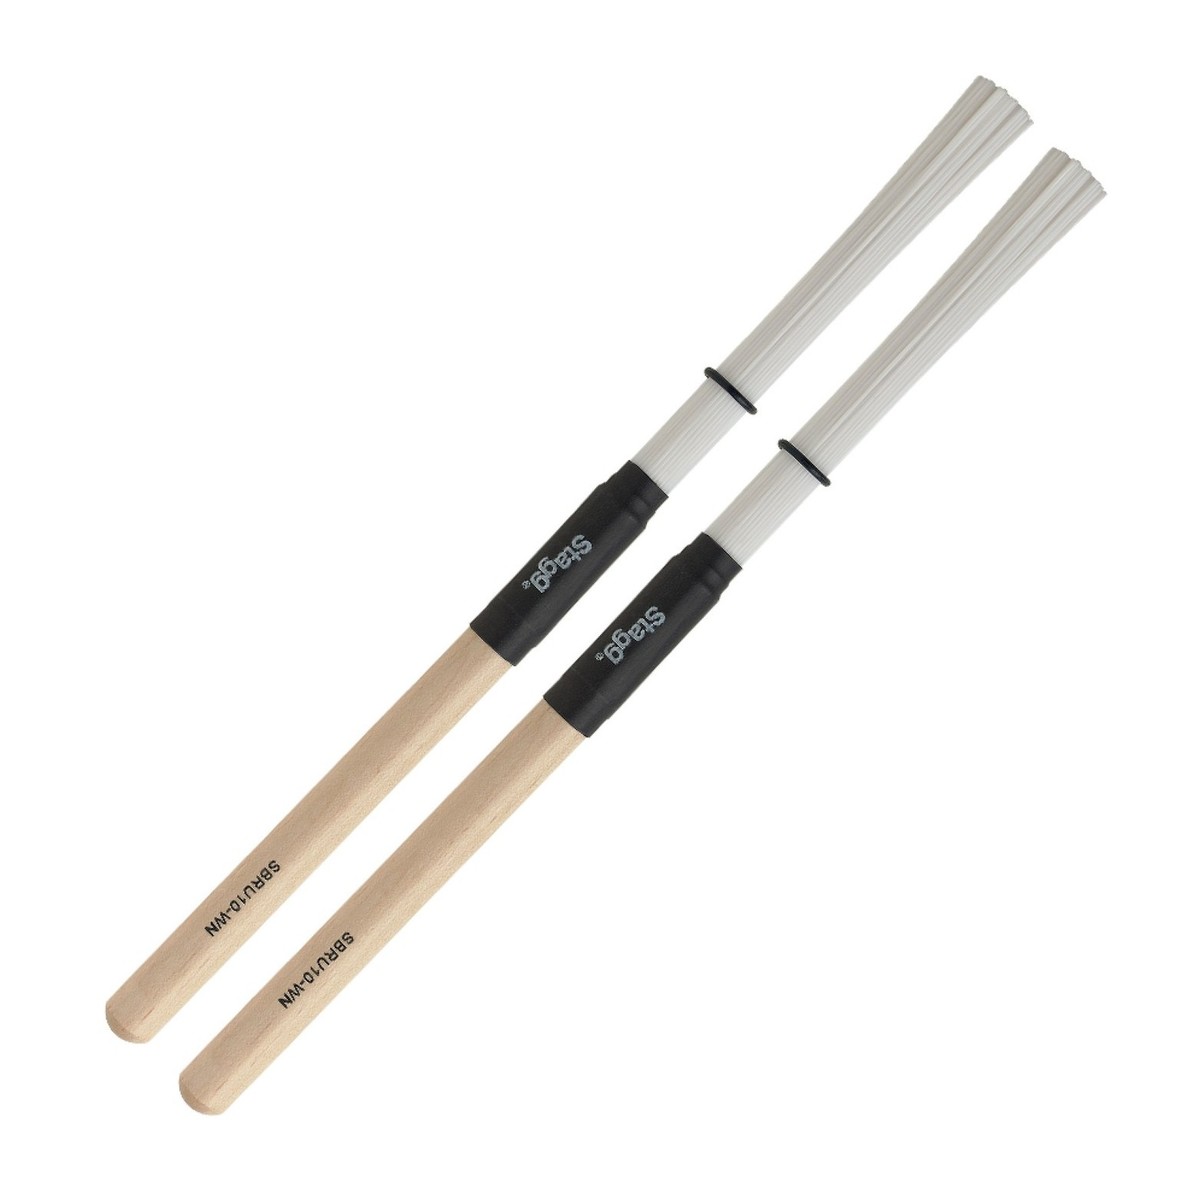 An image of Stagg Nylon Brushes Extra Dynamic Wooden Handle | PMT Online